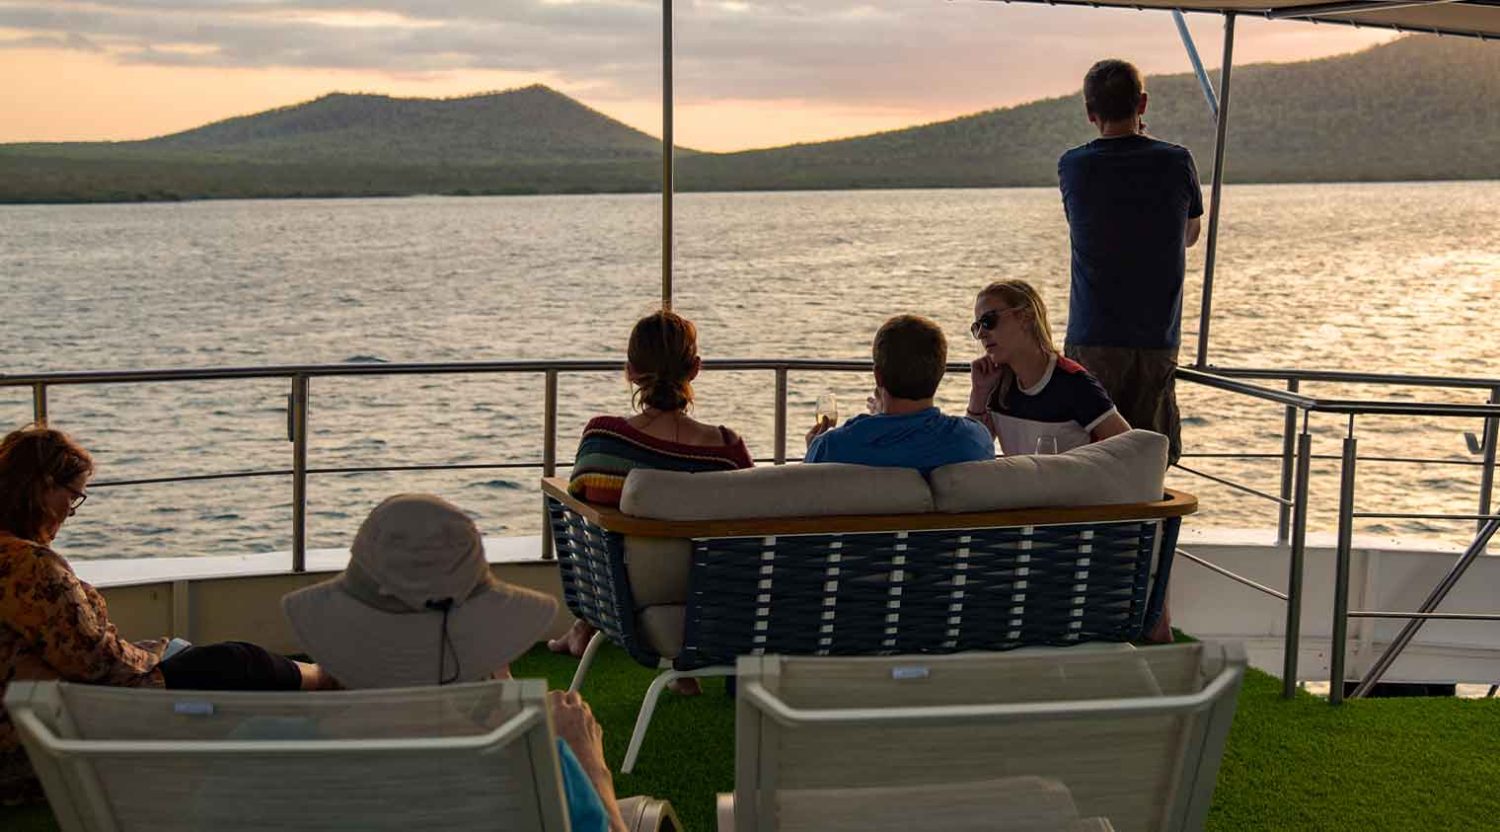 tourists talking on the deck during the sunset in bonita yacht of galapagos islands tours